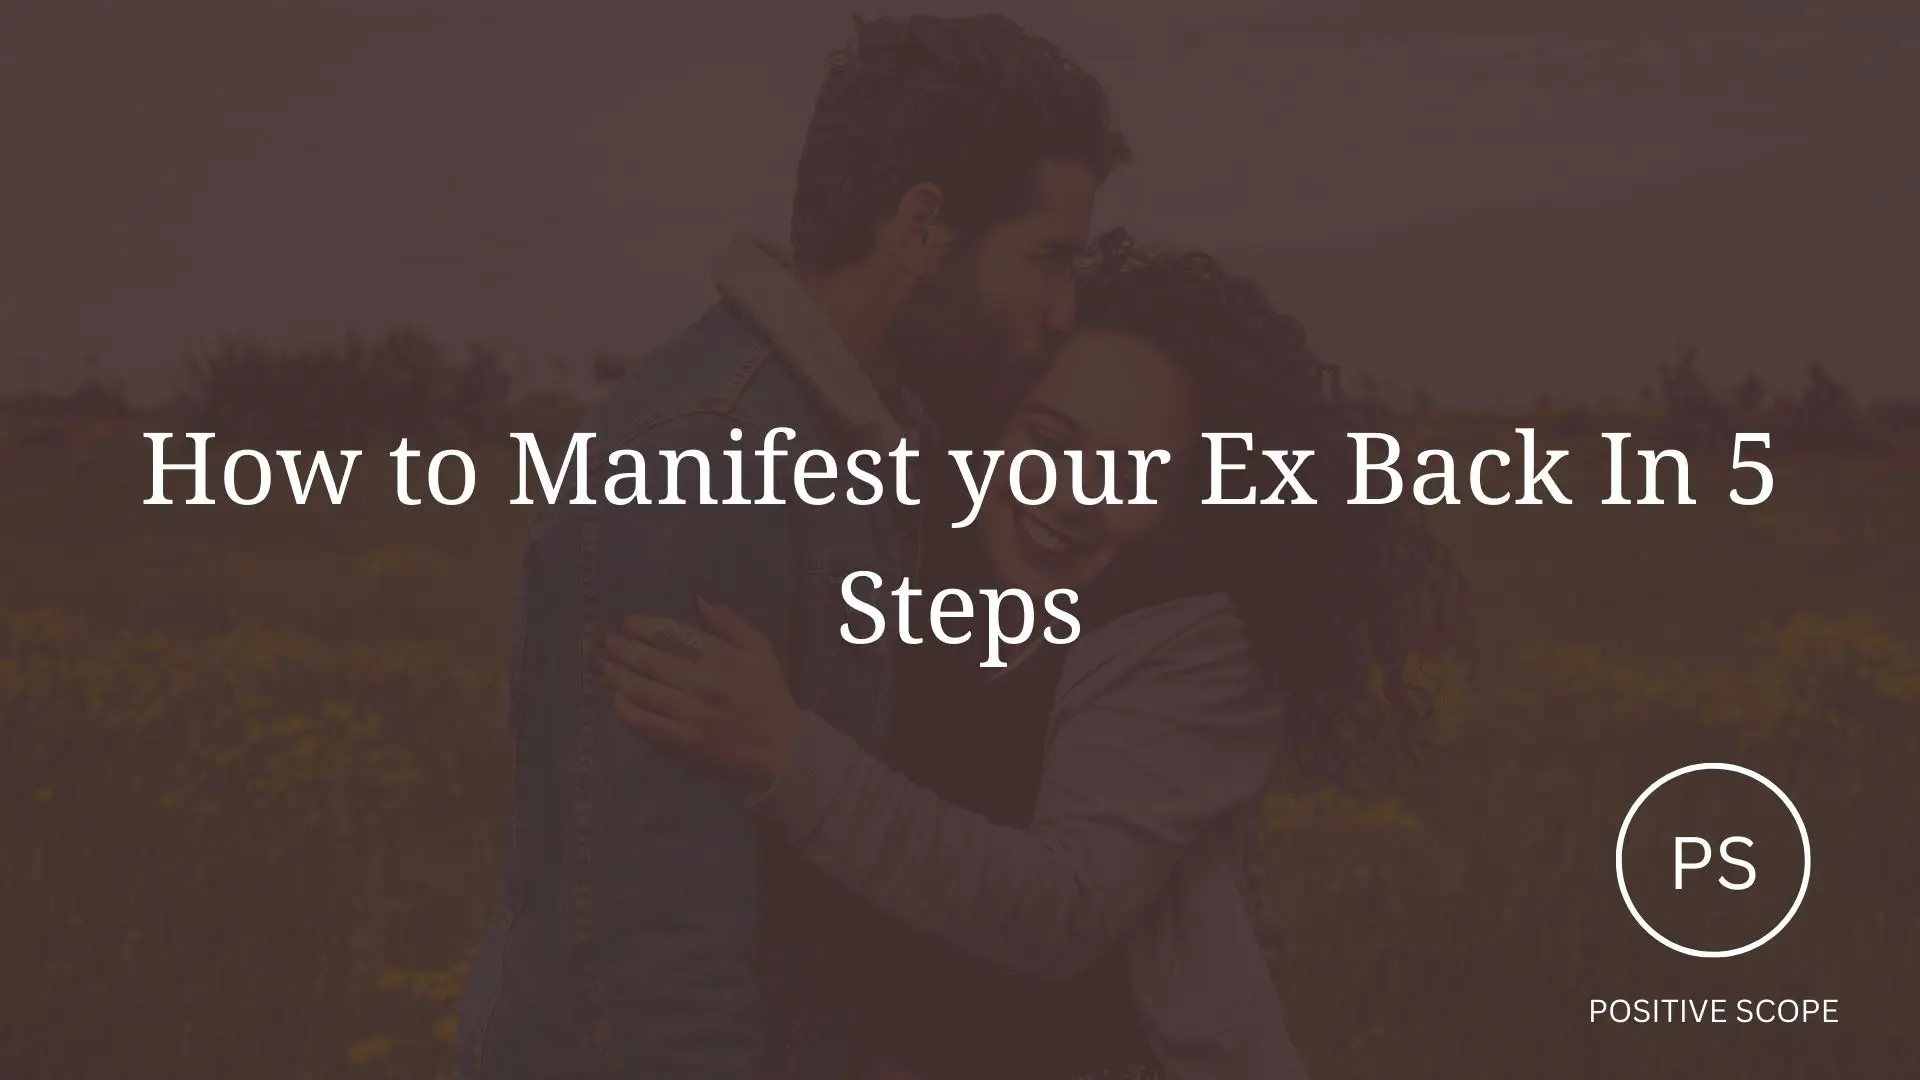 How to Manifest your Ex Back In 5 Steps